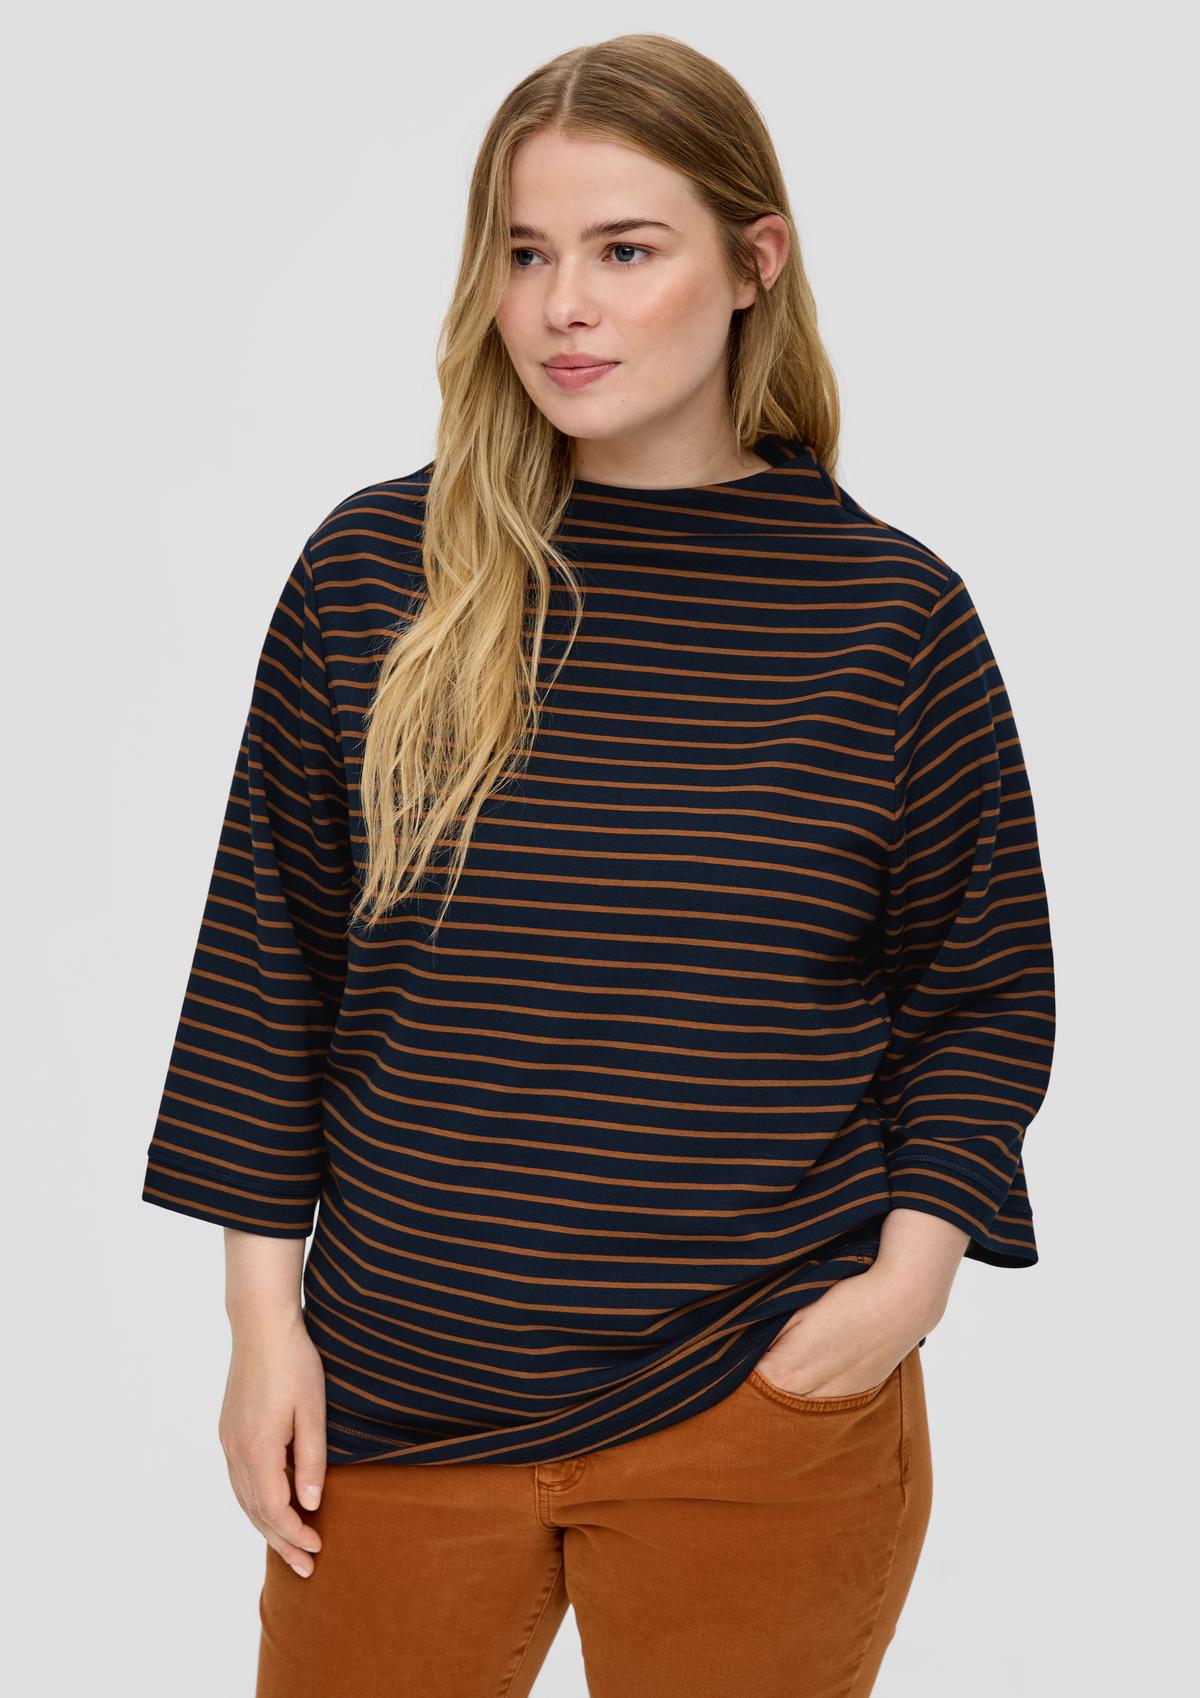 Long sleeve top made of stretch cotton - navy